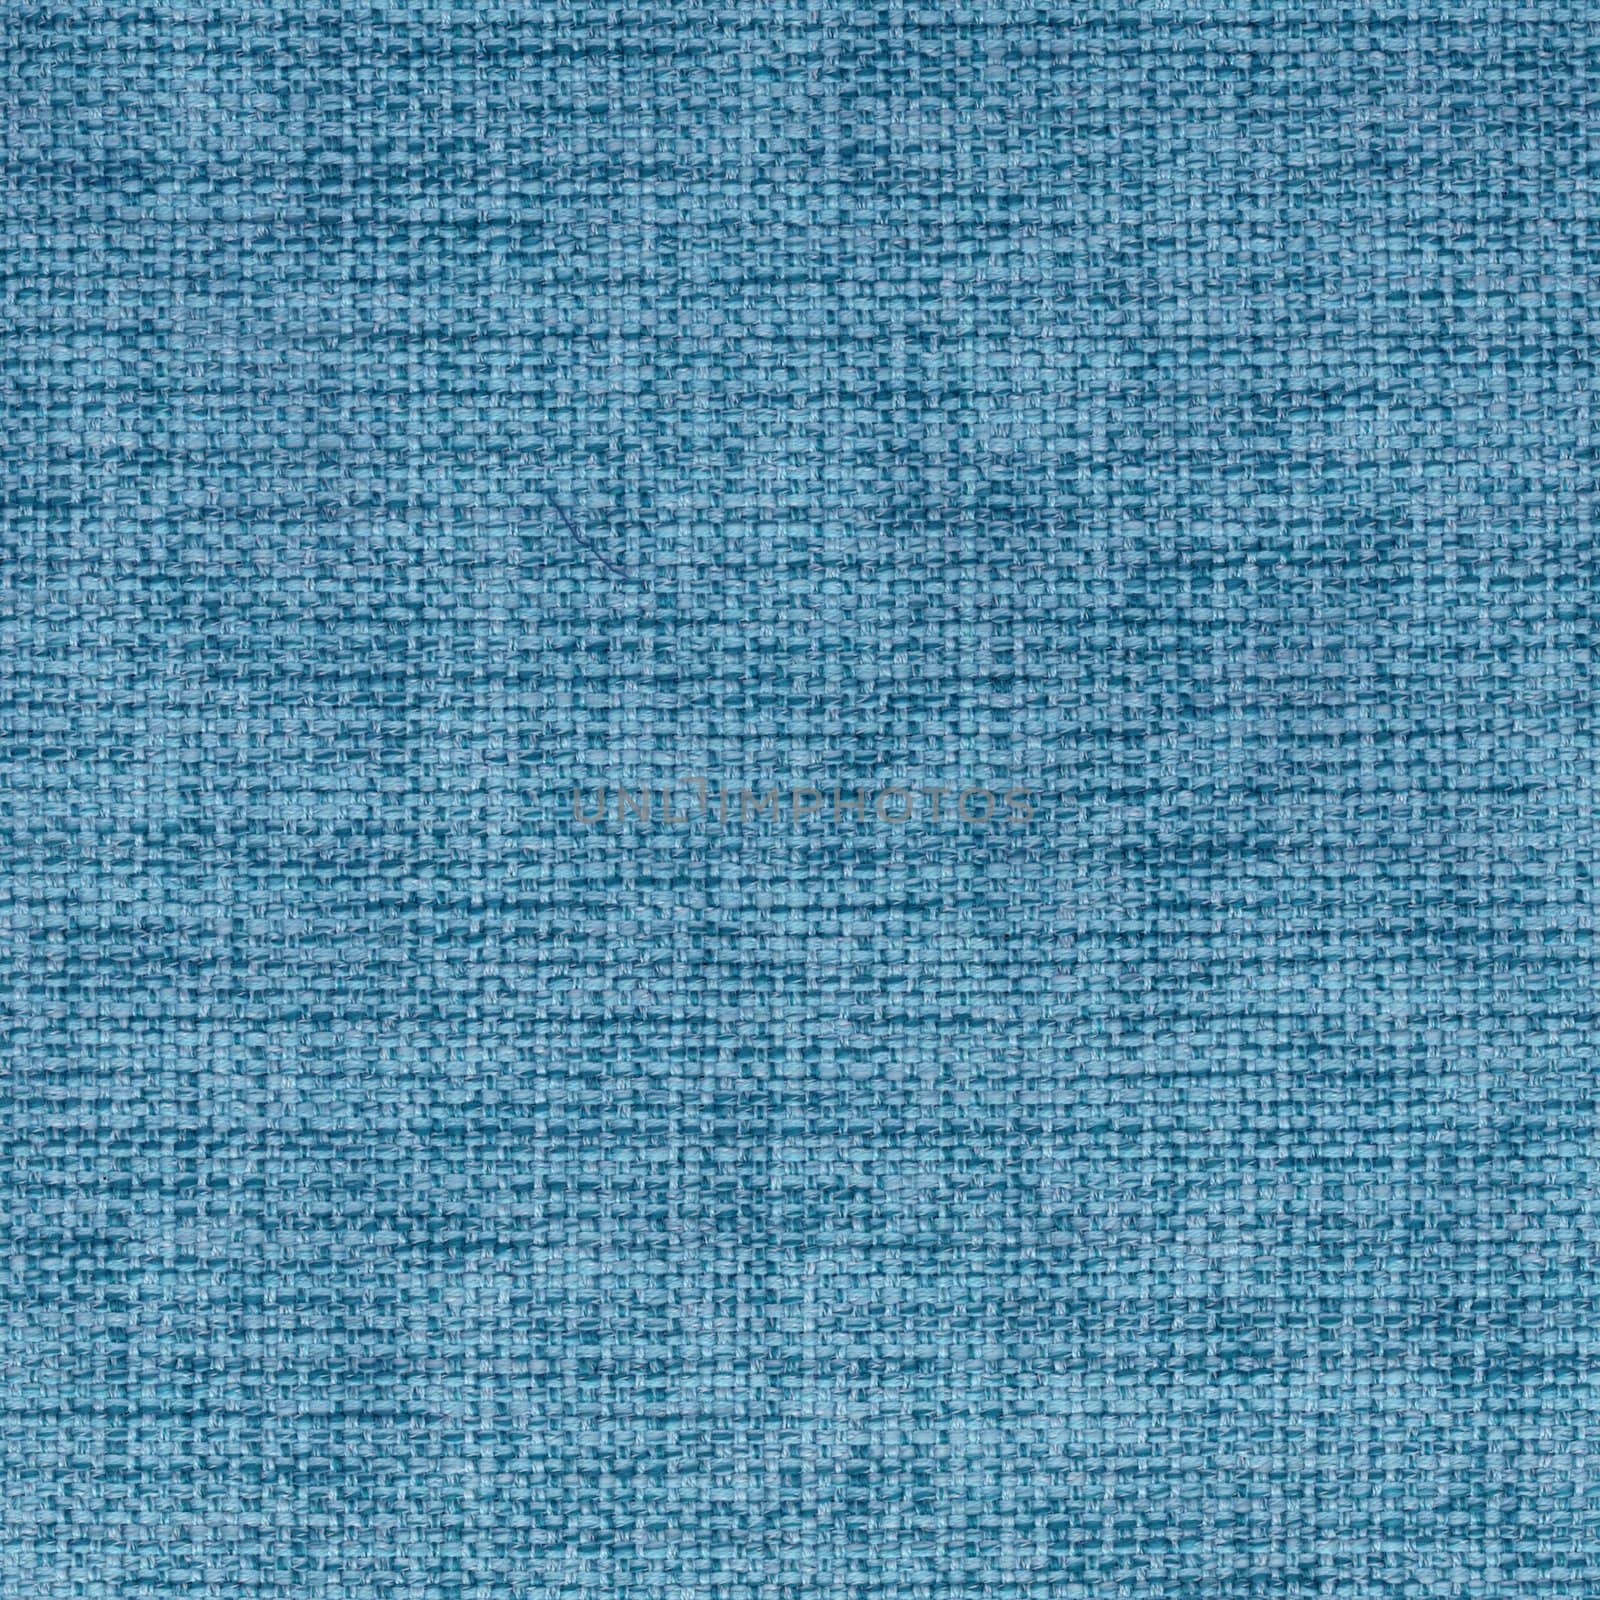 Blue Fabric Texture (High.res.scan)